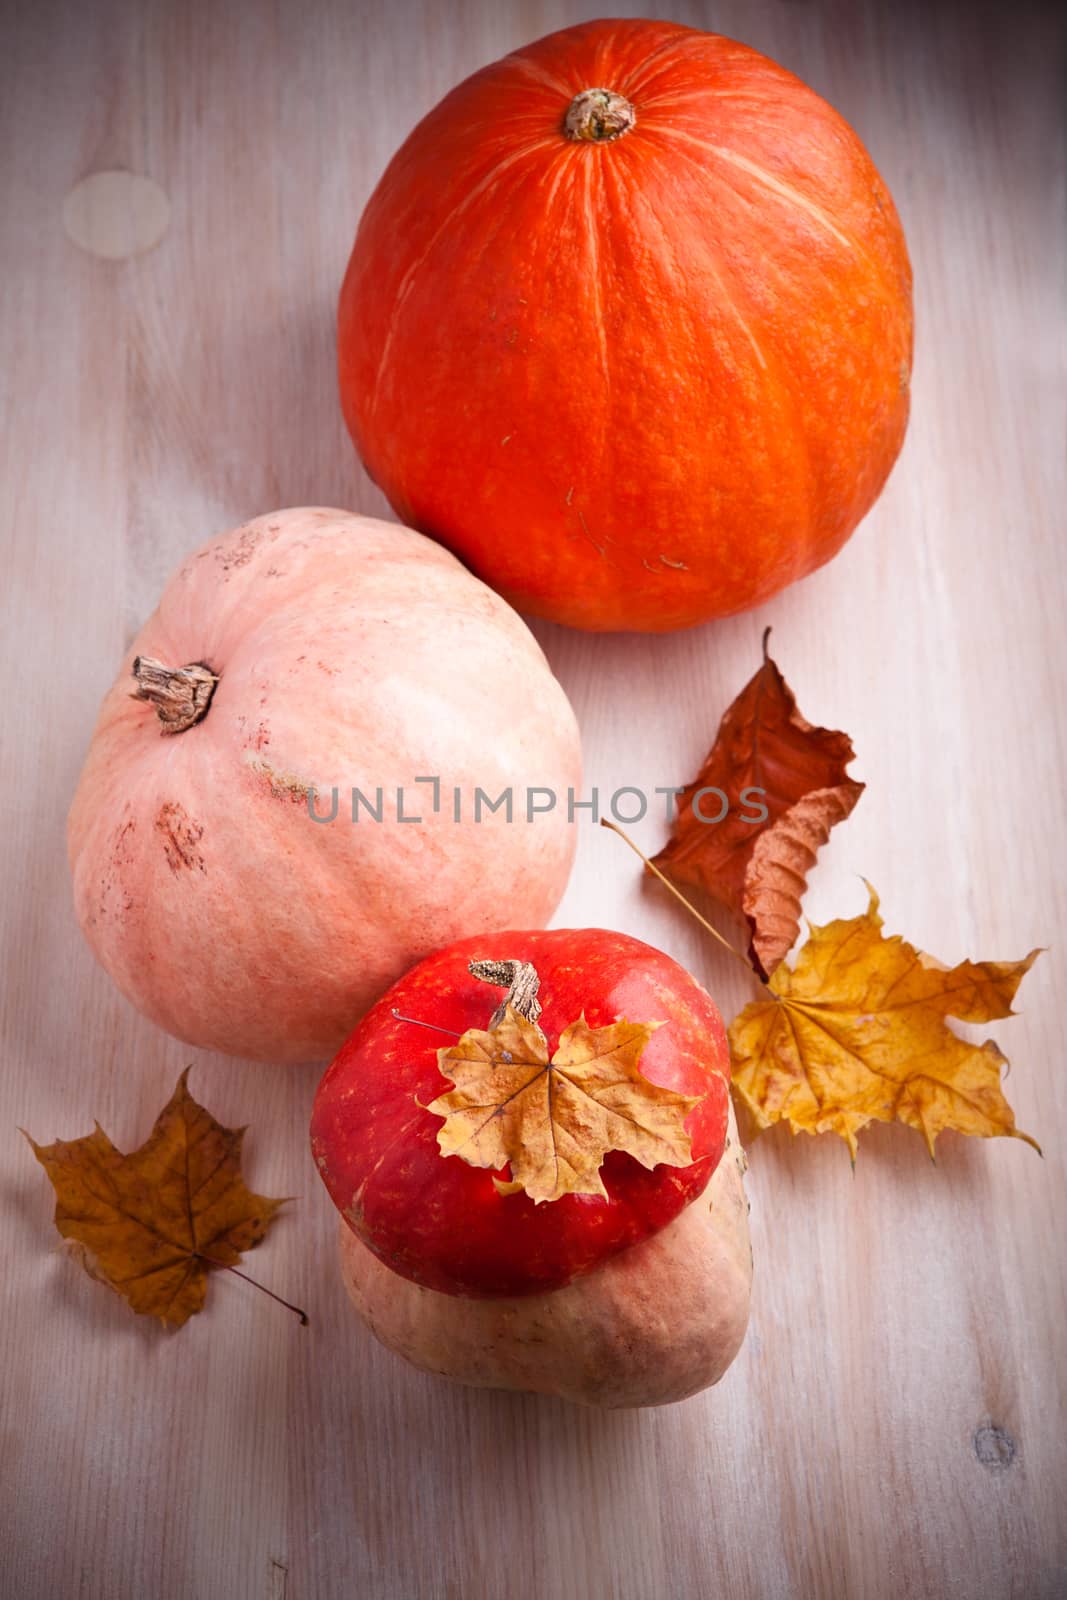 Pumpkins and turk's turban squash on wooden table